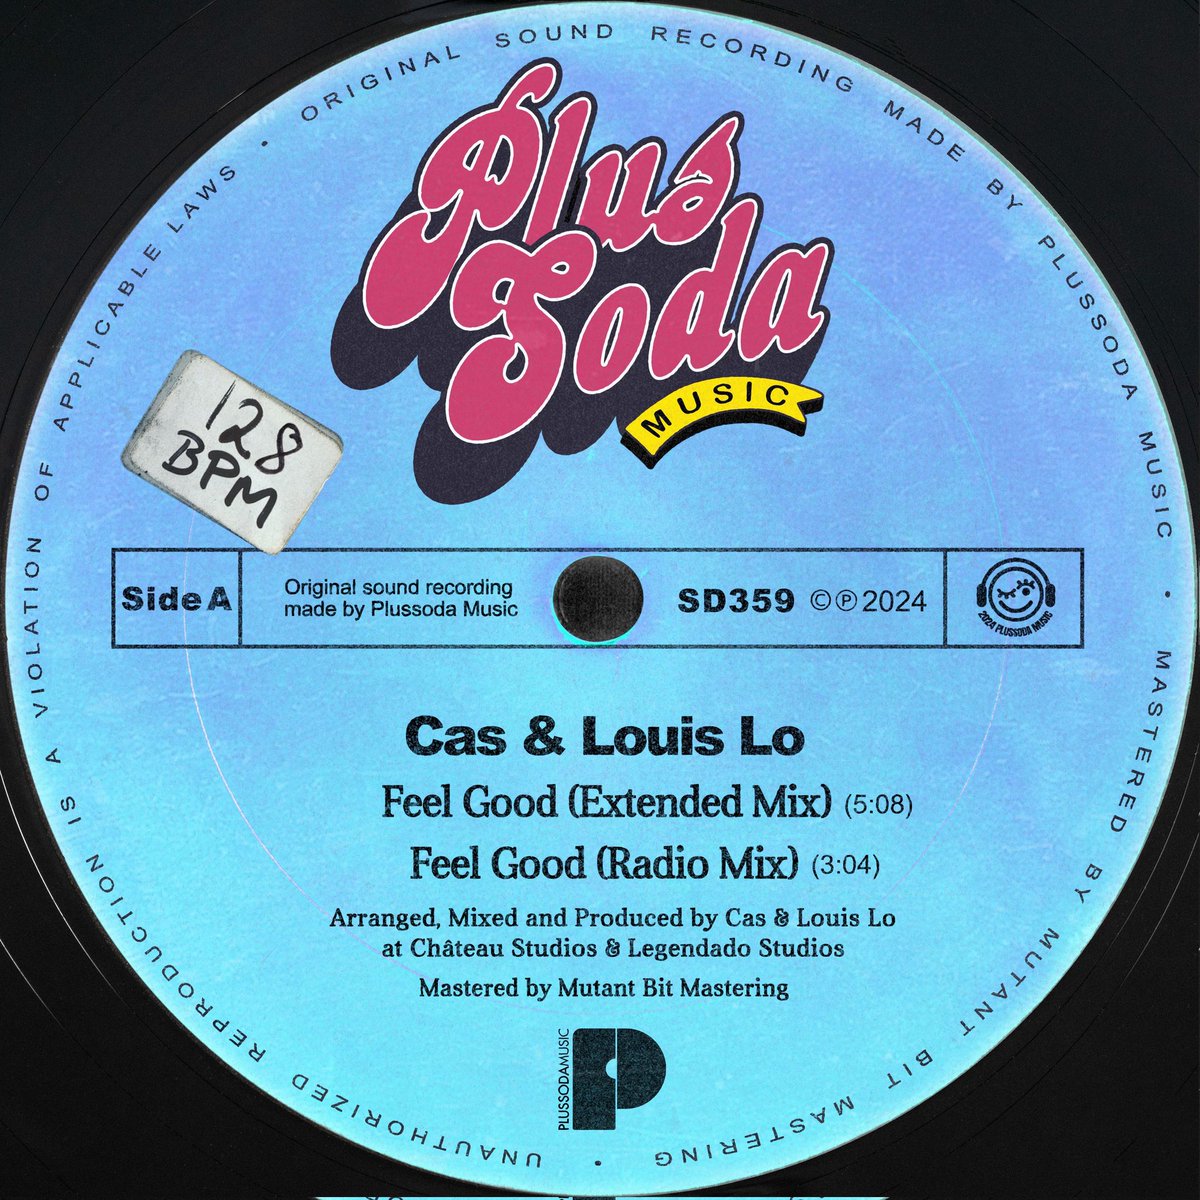 New music available now for pre-order. Give it a spin and let me know what you think.

beatport.com/release/feel-g…

#cas #louislo #housemusic #jackinhouse #funkyhouse #beatport #beatporthype #beatporthousechart #beatportexclusive #plussoda